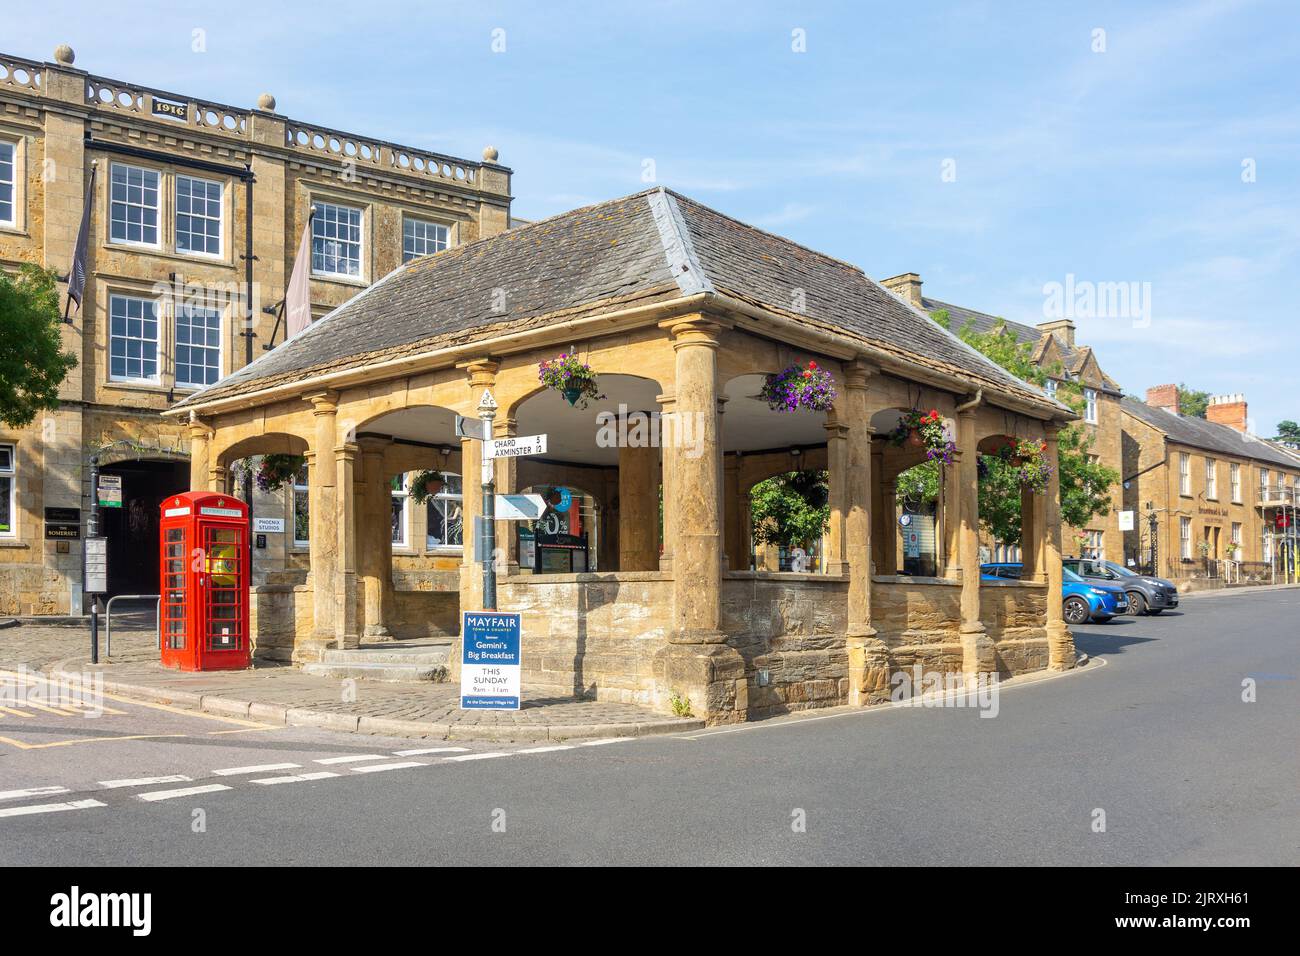 The Ancient Market House, Market Place, Ilminster, Somerset, England, United Kingdom Stock Photo